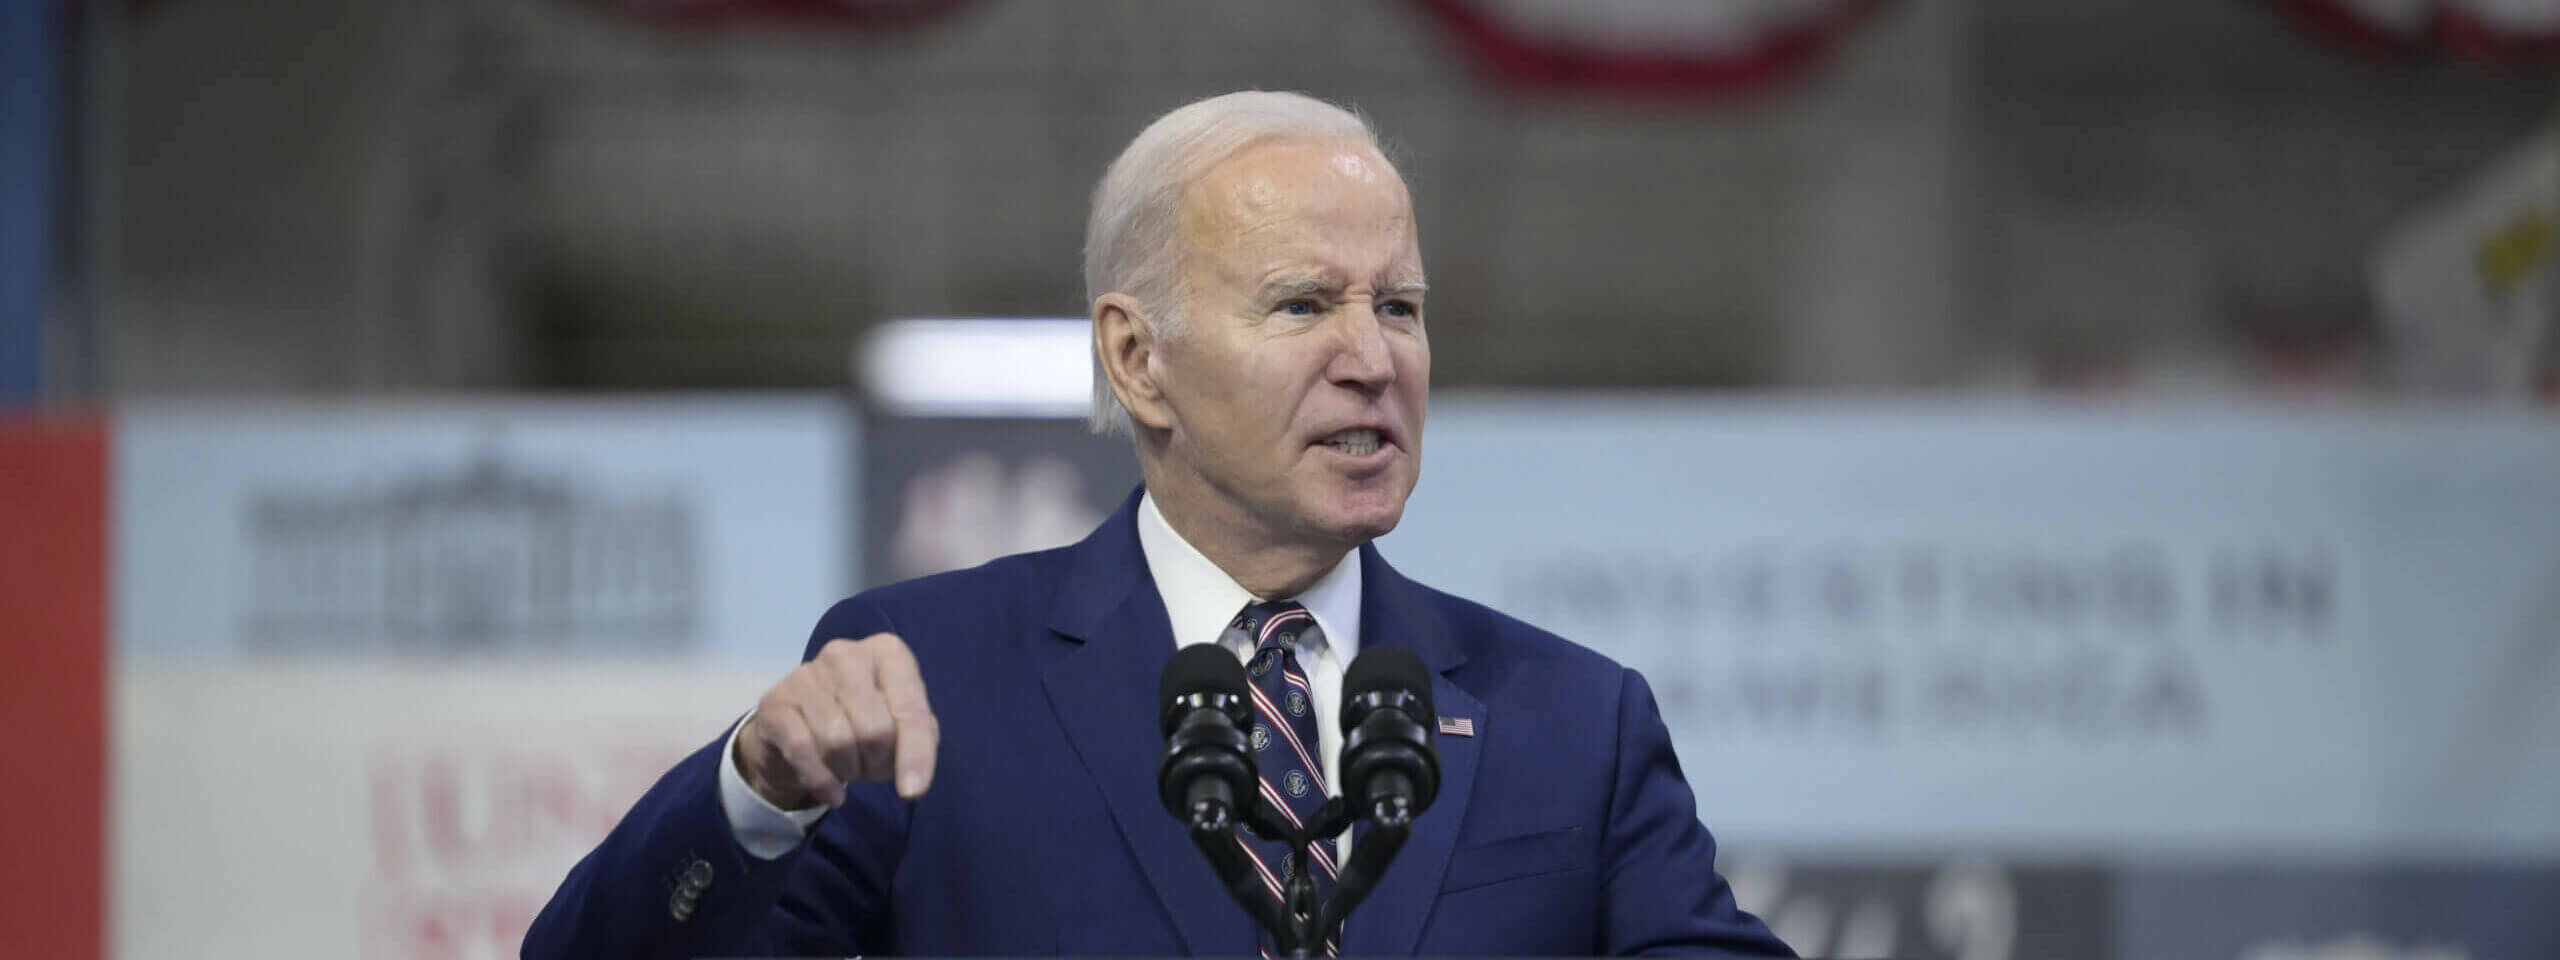 Joe Biden: ‘MAGA Republicans Are Calling For Defunding the Police Department’ › American Greatness